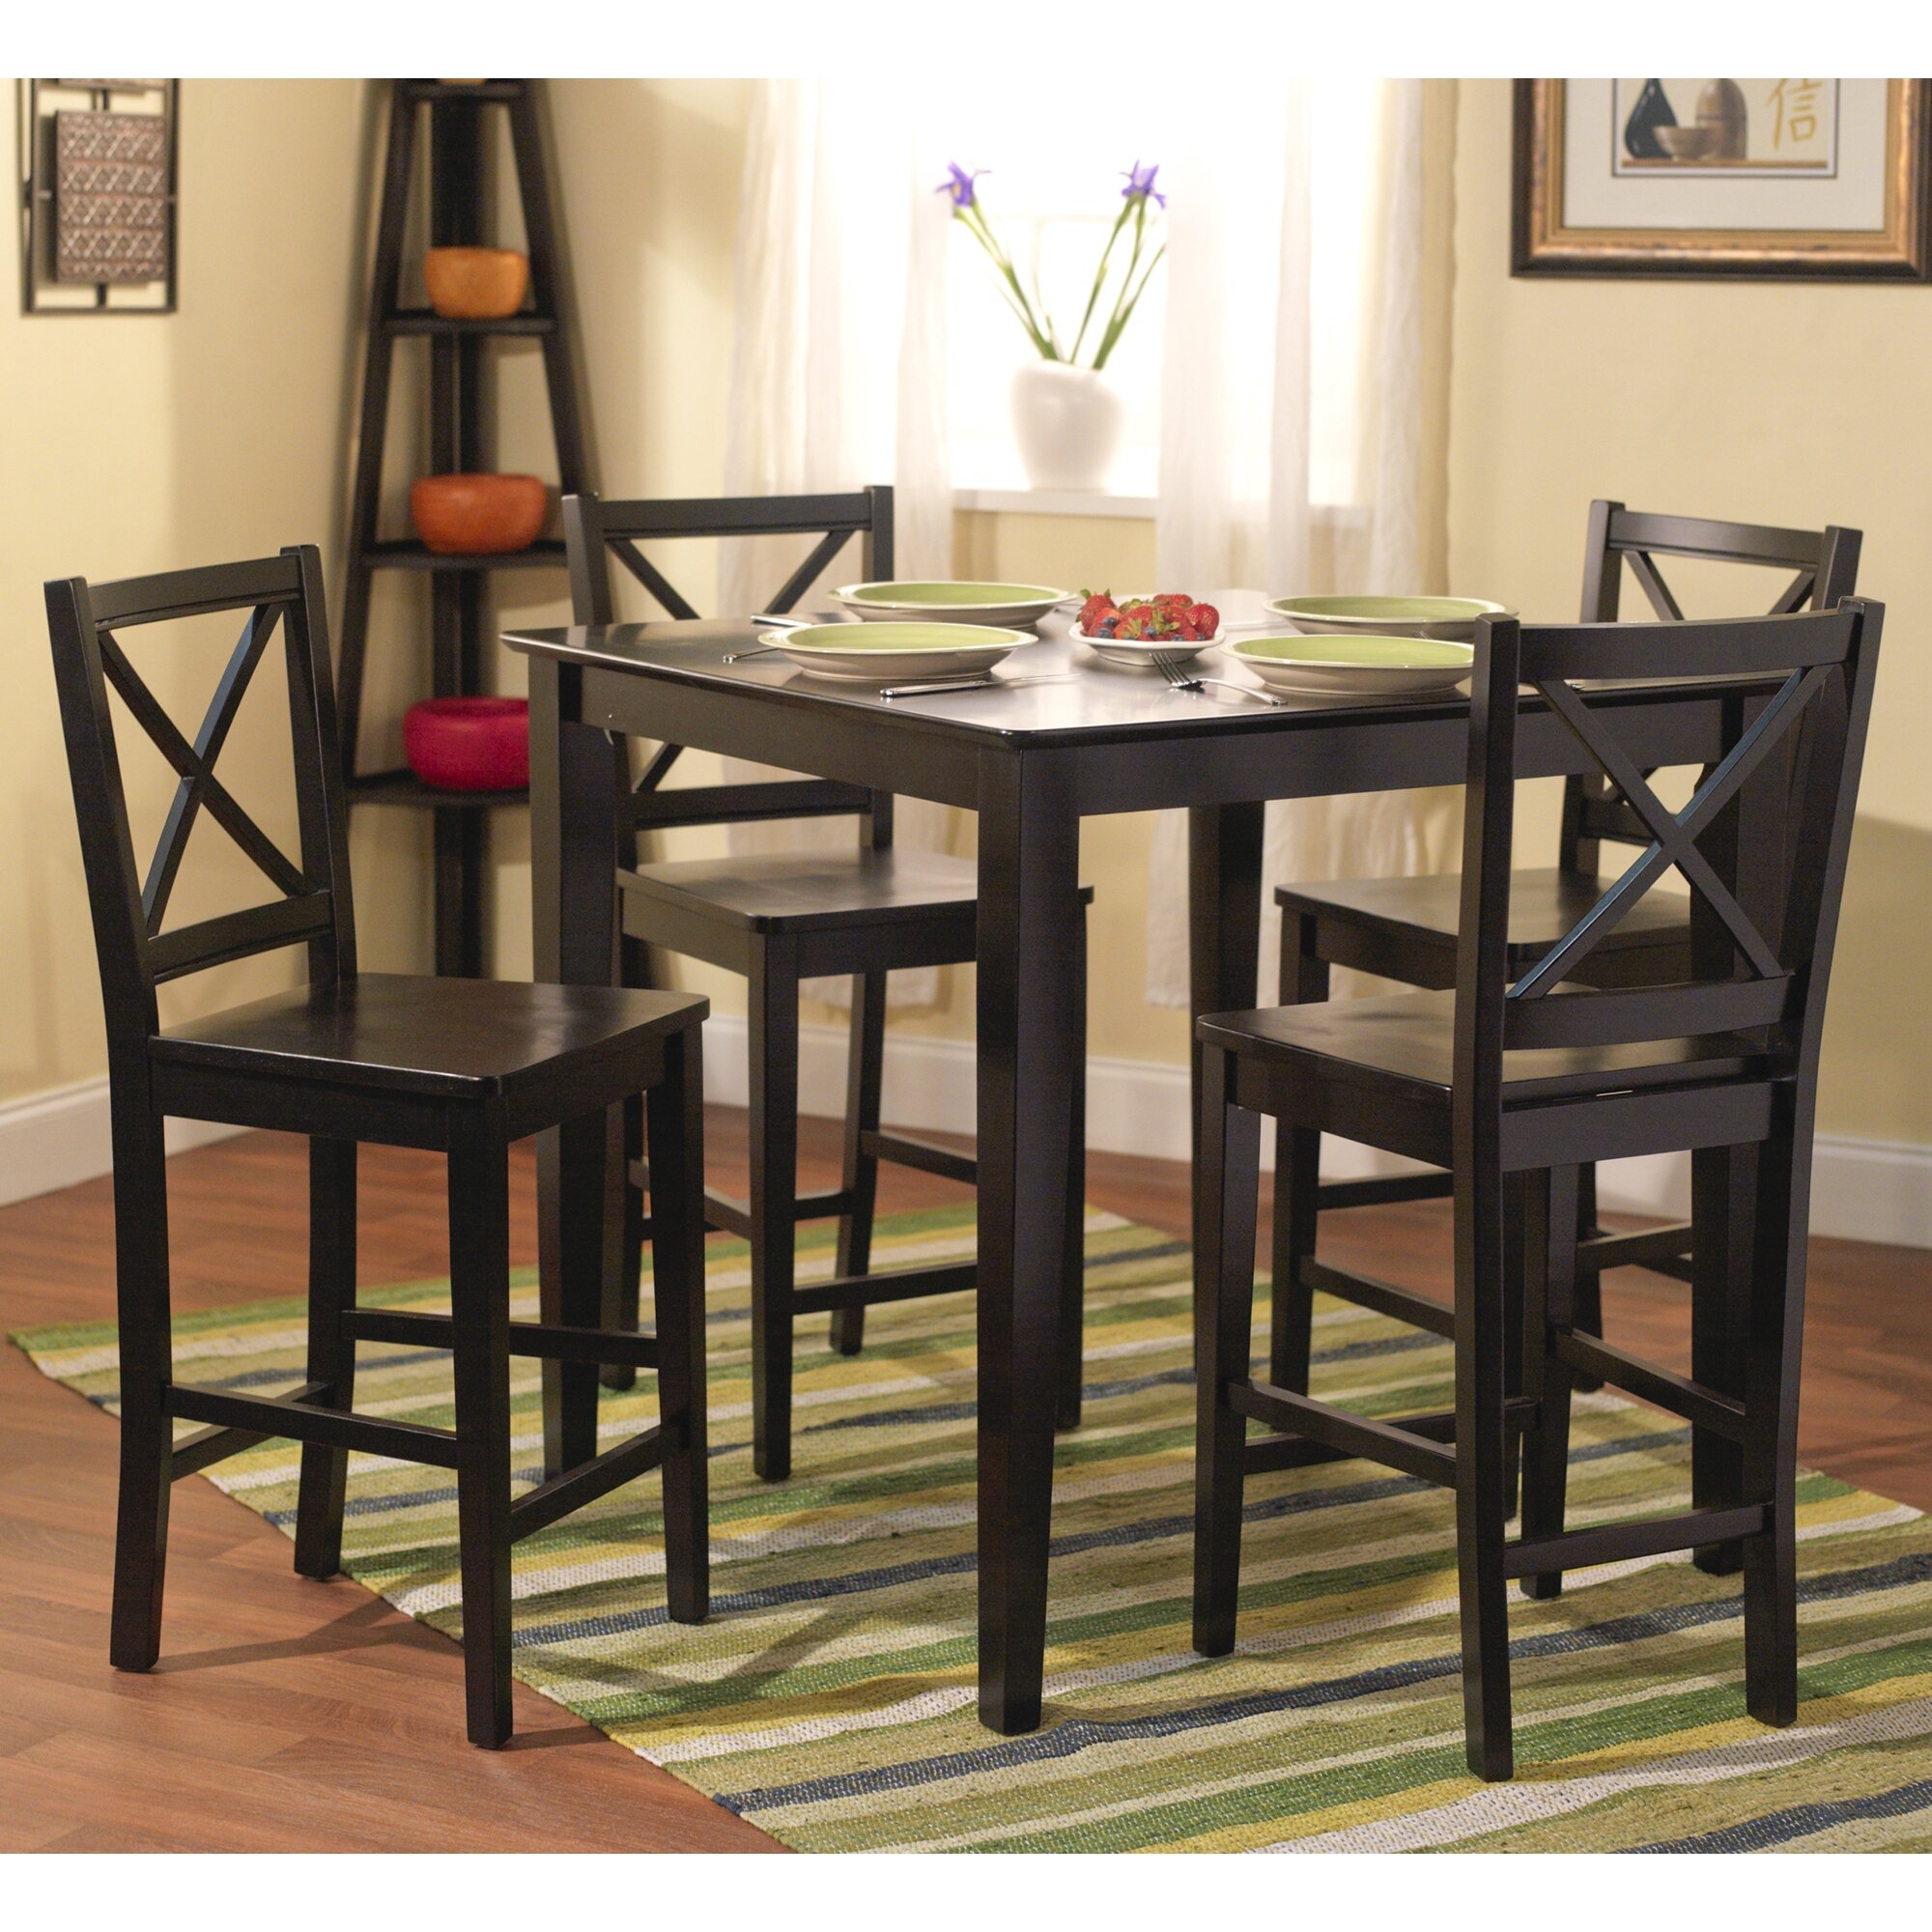 Overstock this five piece counter height table and chair set